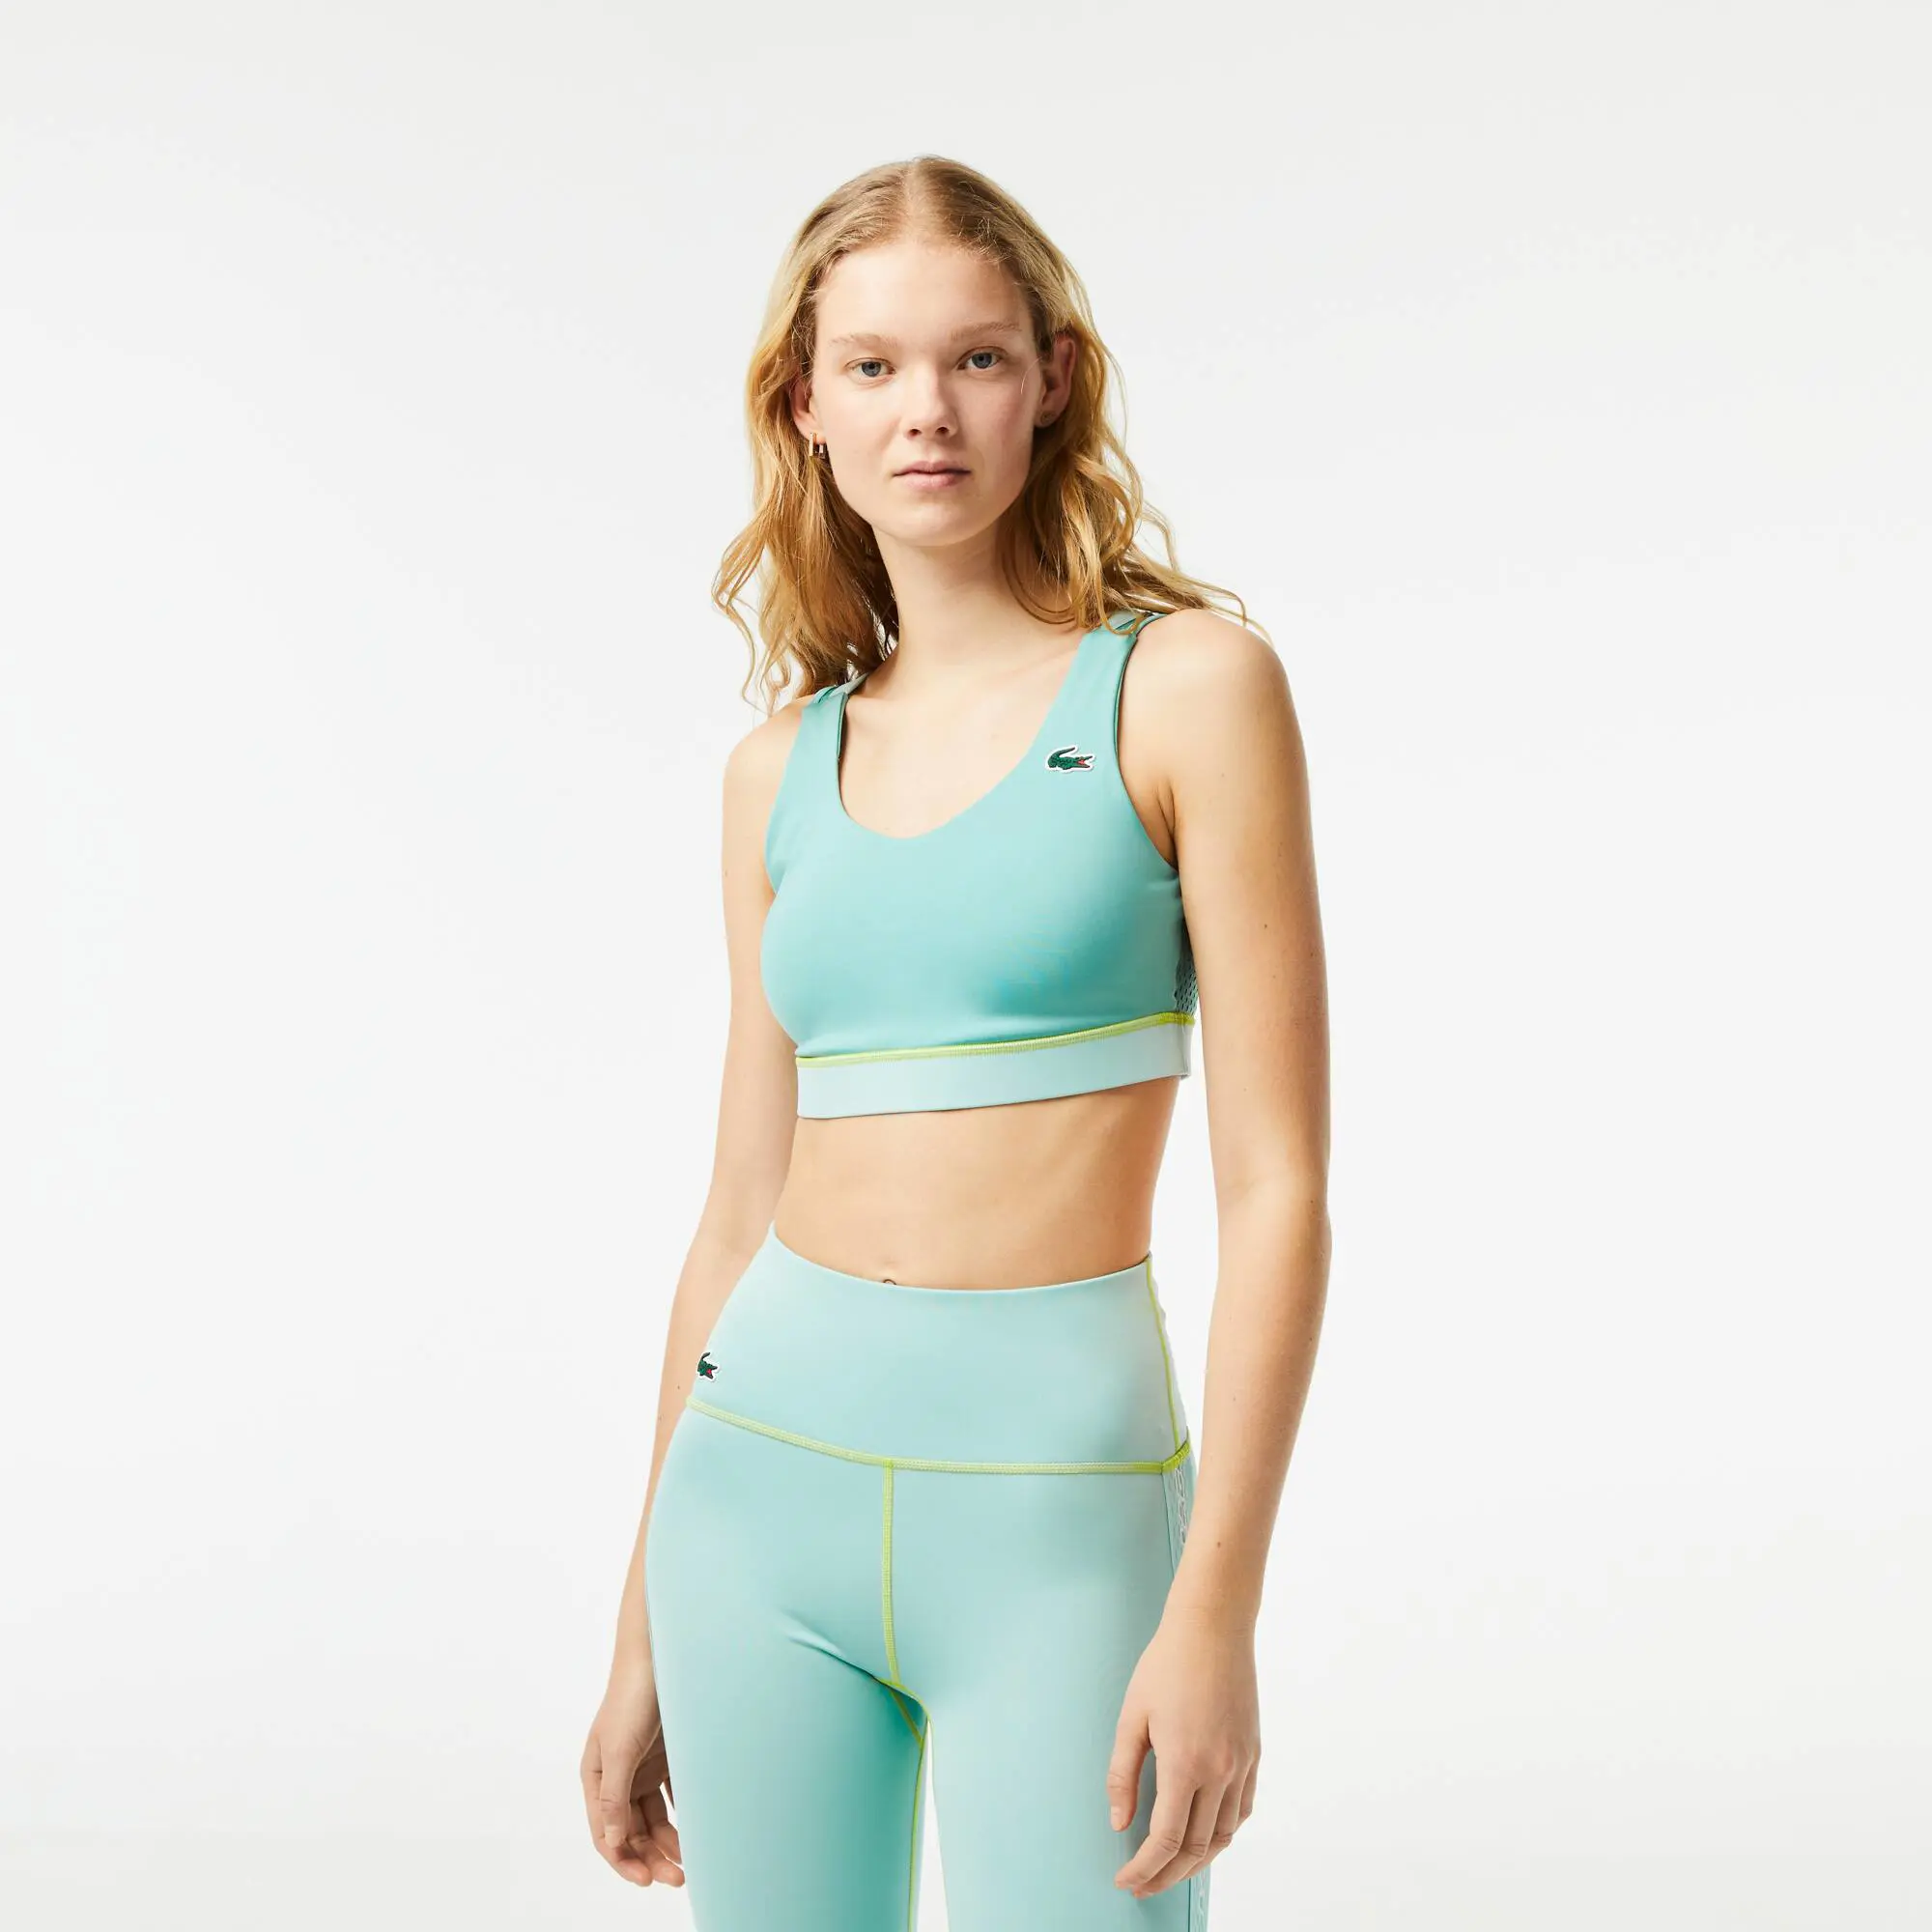 Lacoste Women’s Lacoste Sport Ultra-Dry Recycled Polyester Sports Bra. 1